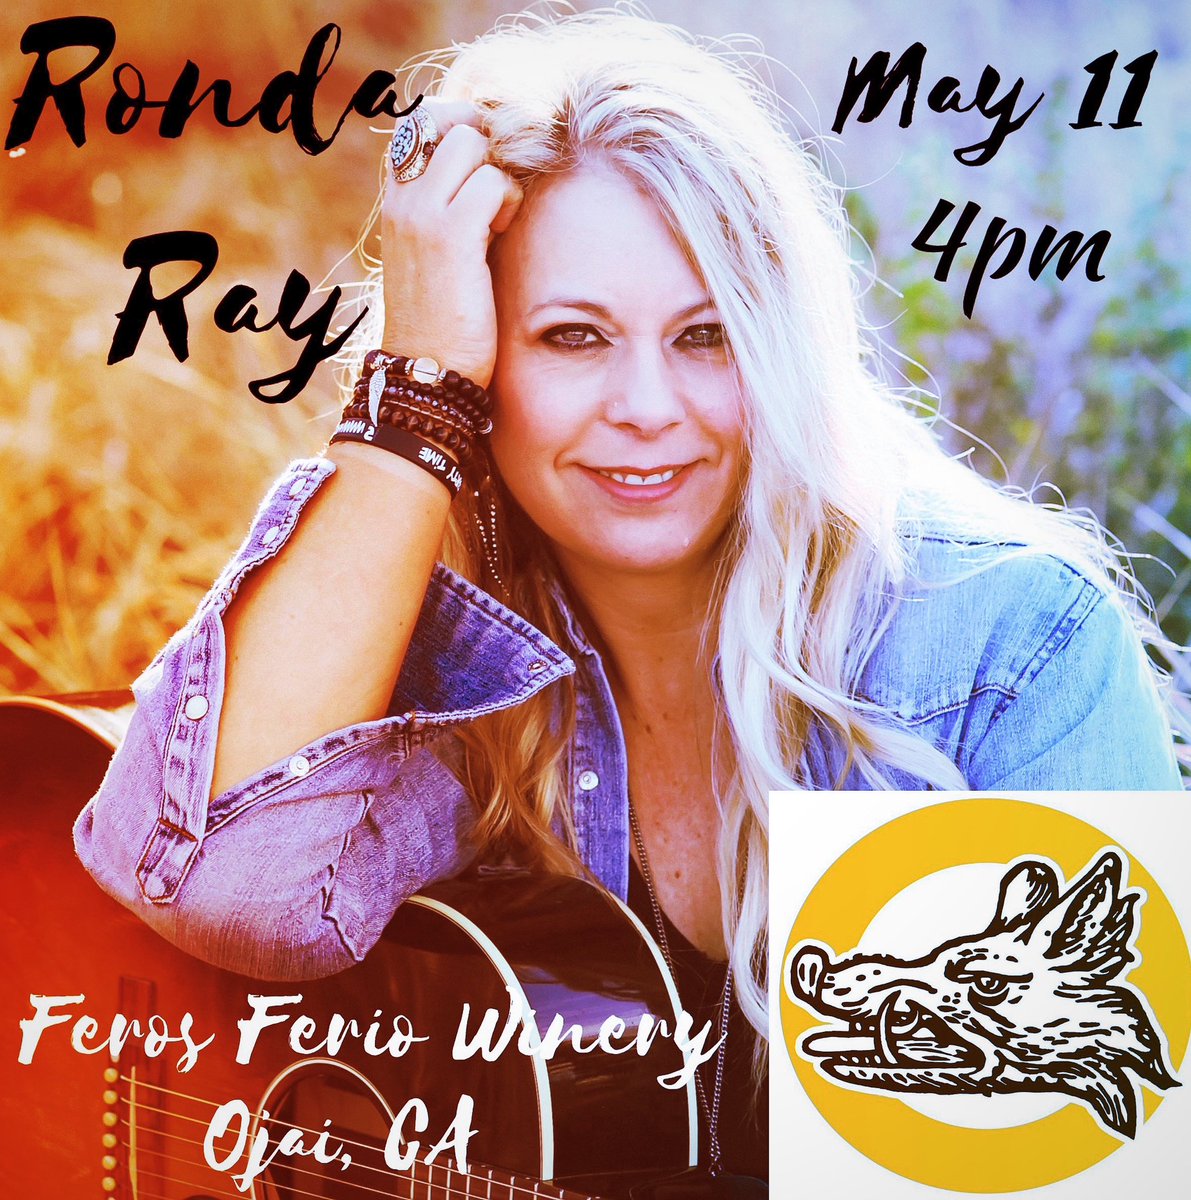 See you Sat May 11 at Feros Ferio Winery in Ojai, CA at 4pm. Let’s rock!